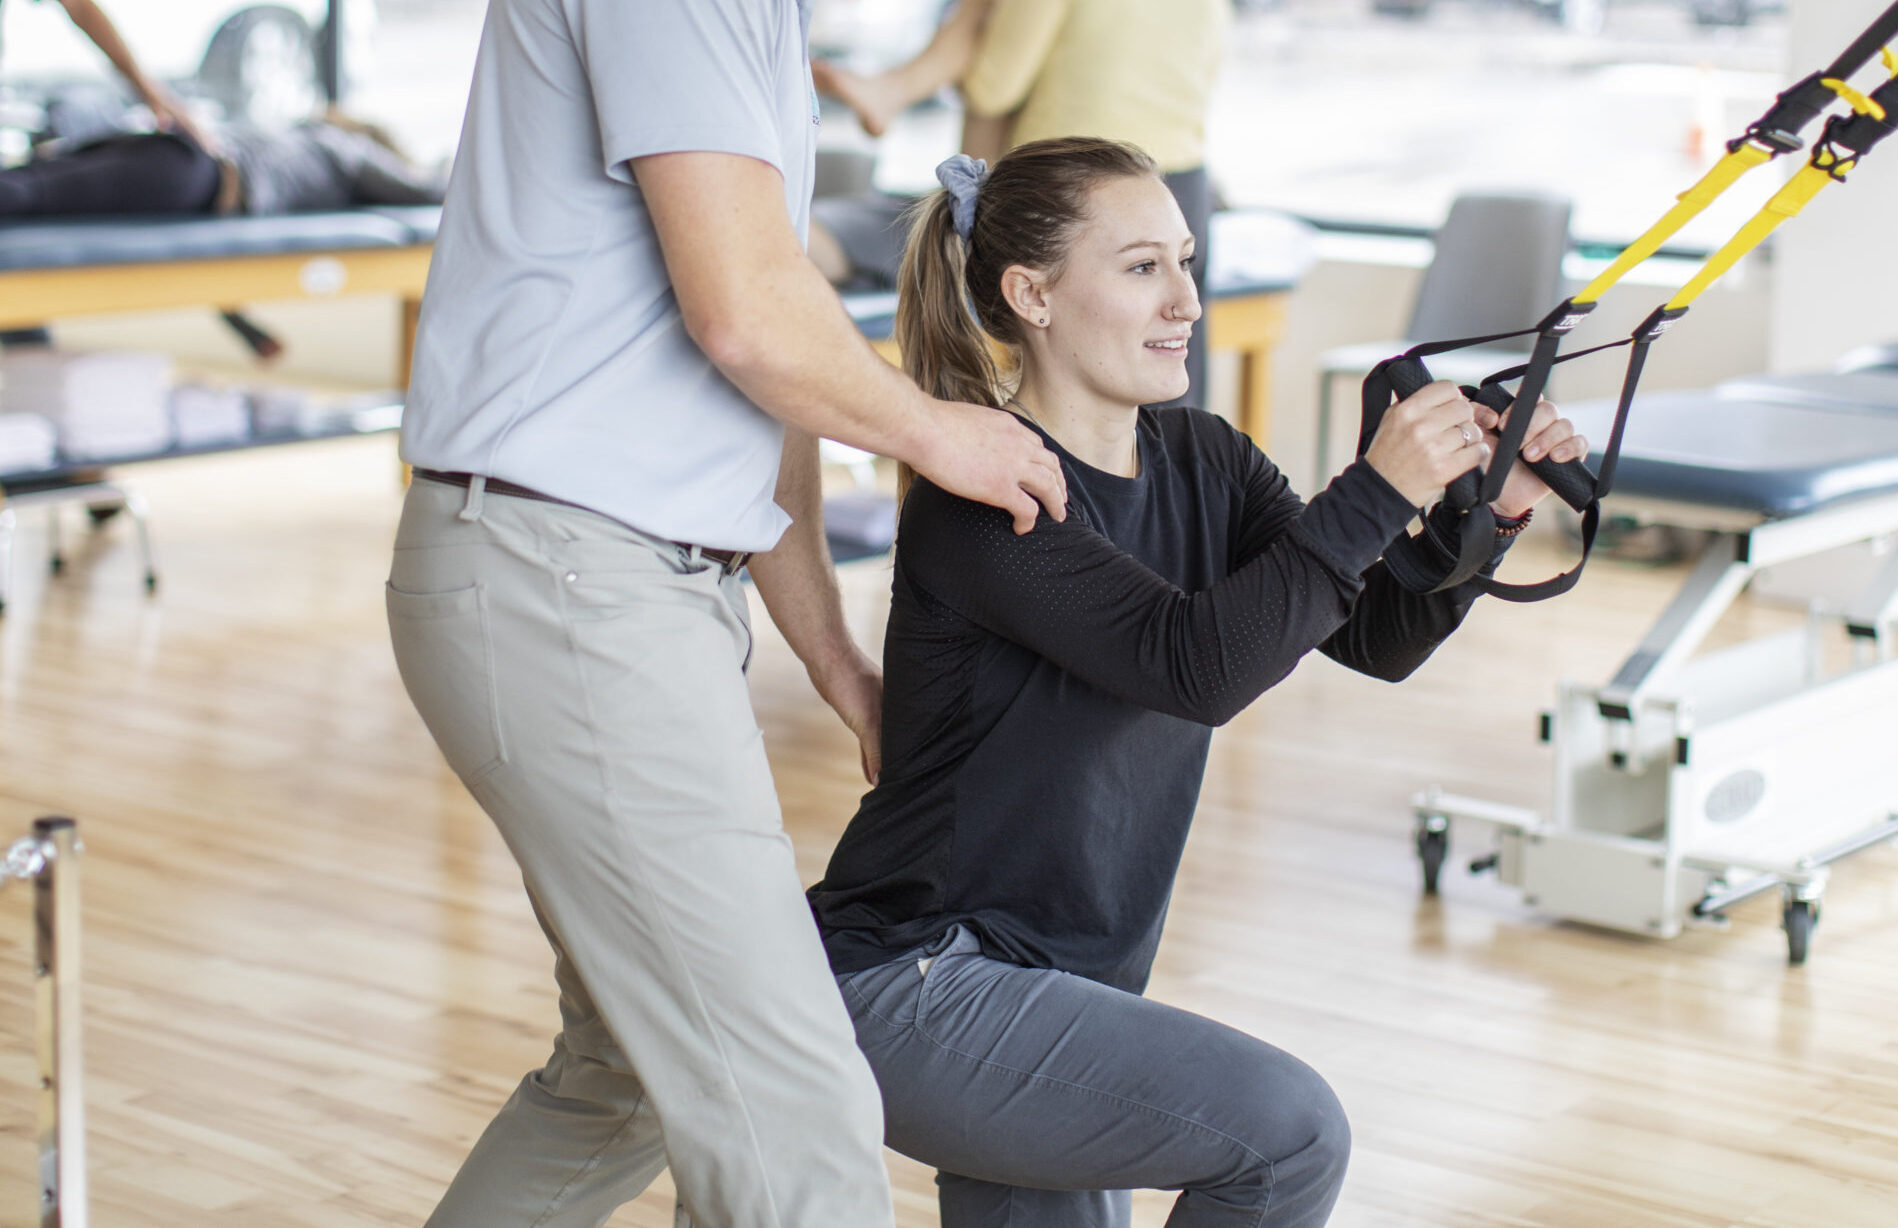 A physical therapist working with a patient on the TRX stretching equipment.